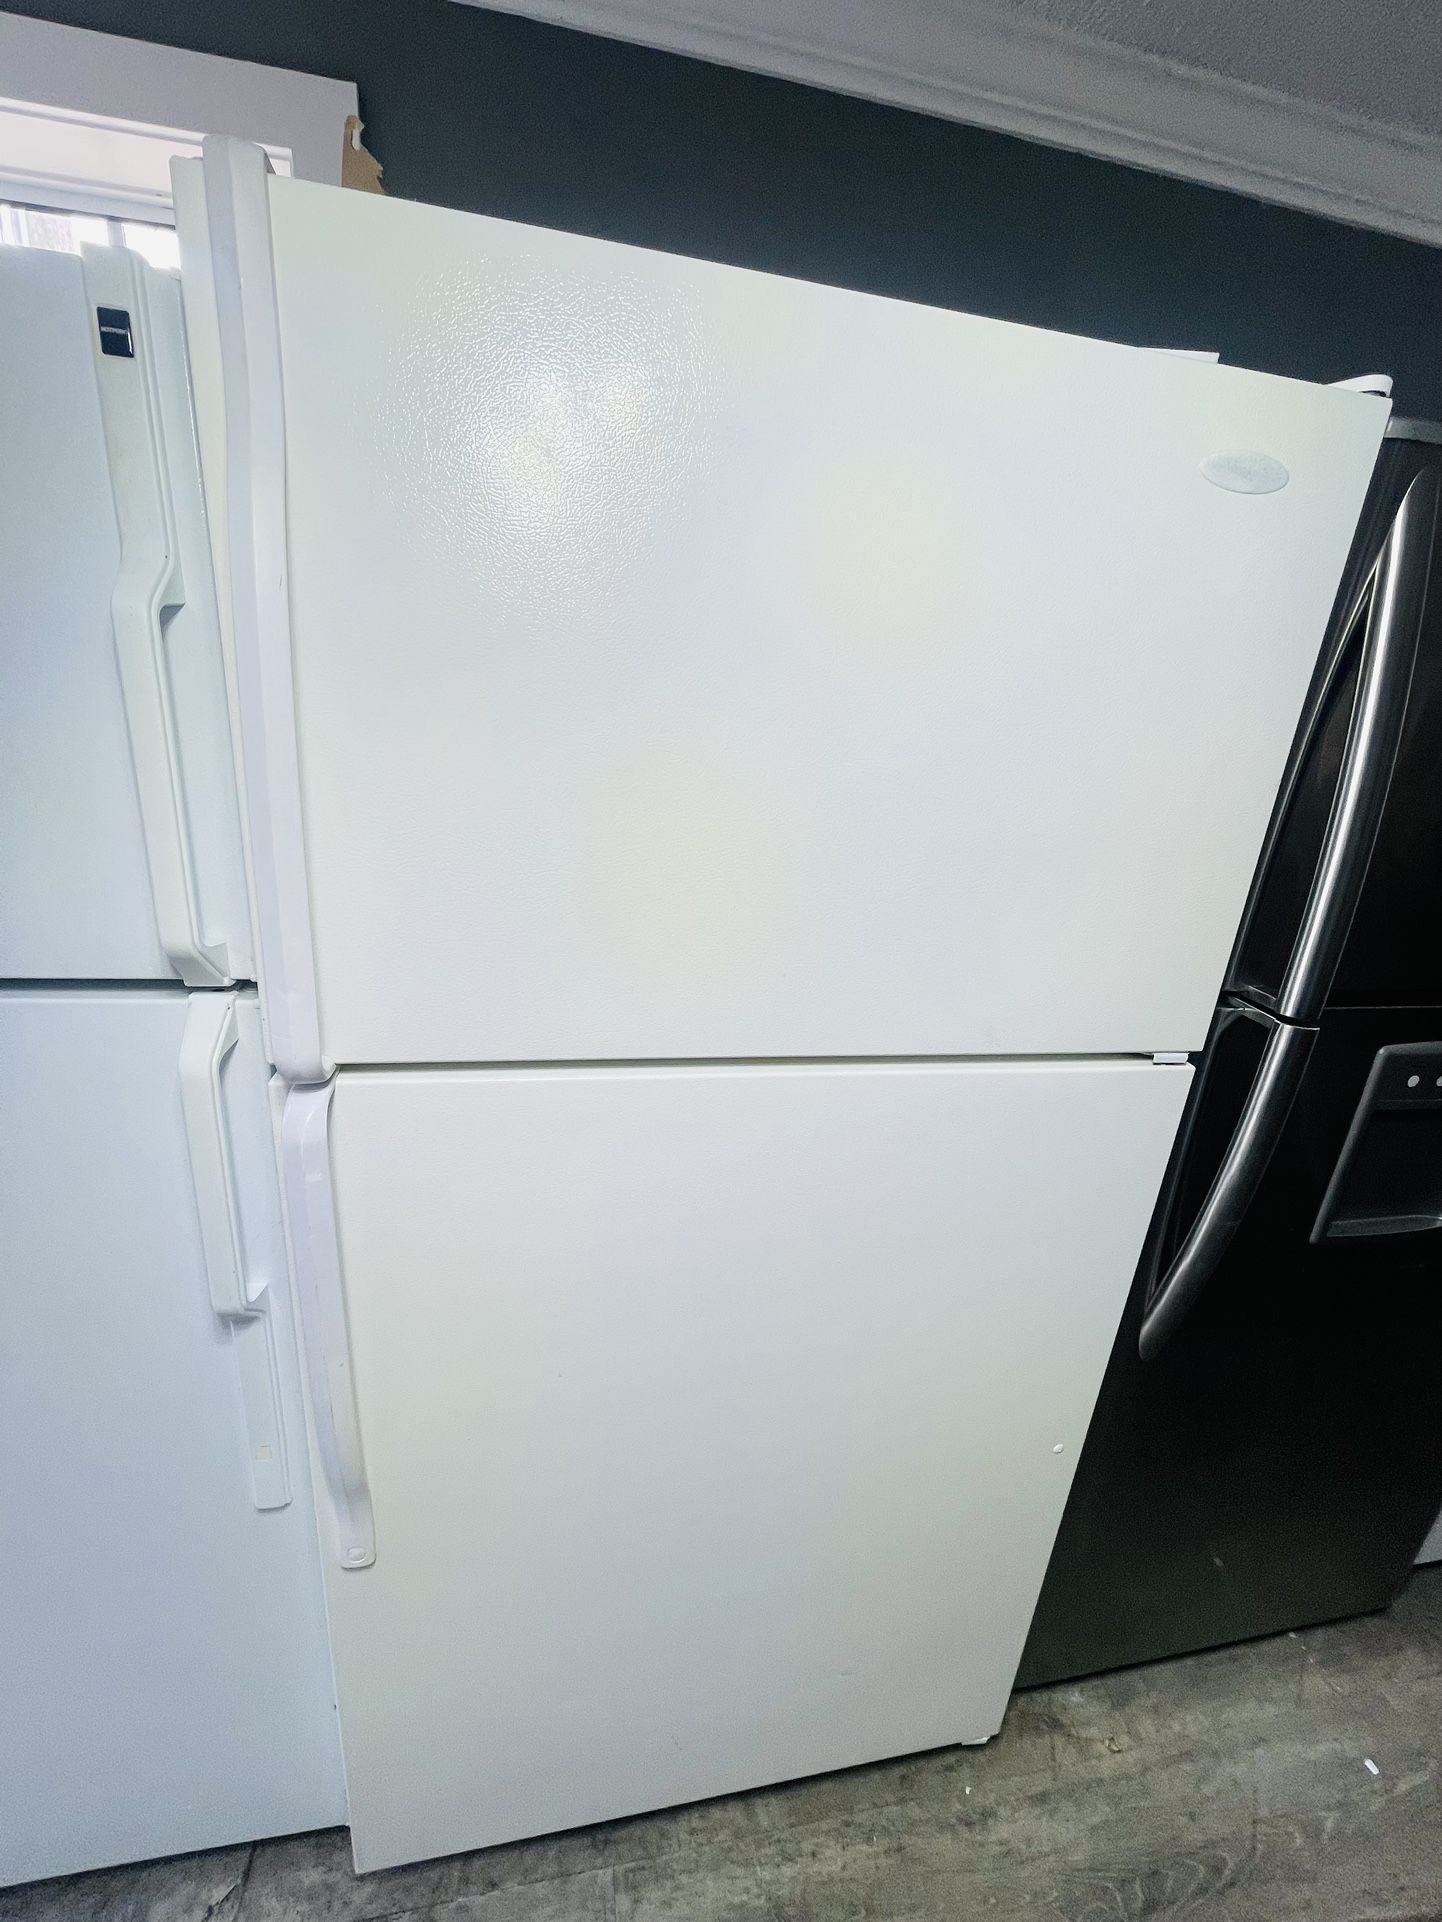 Whirlpool Top And Bottom Refrigerator 33inch 